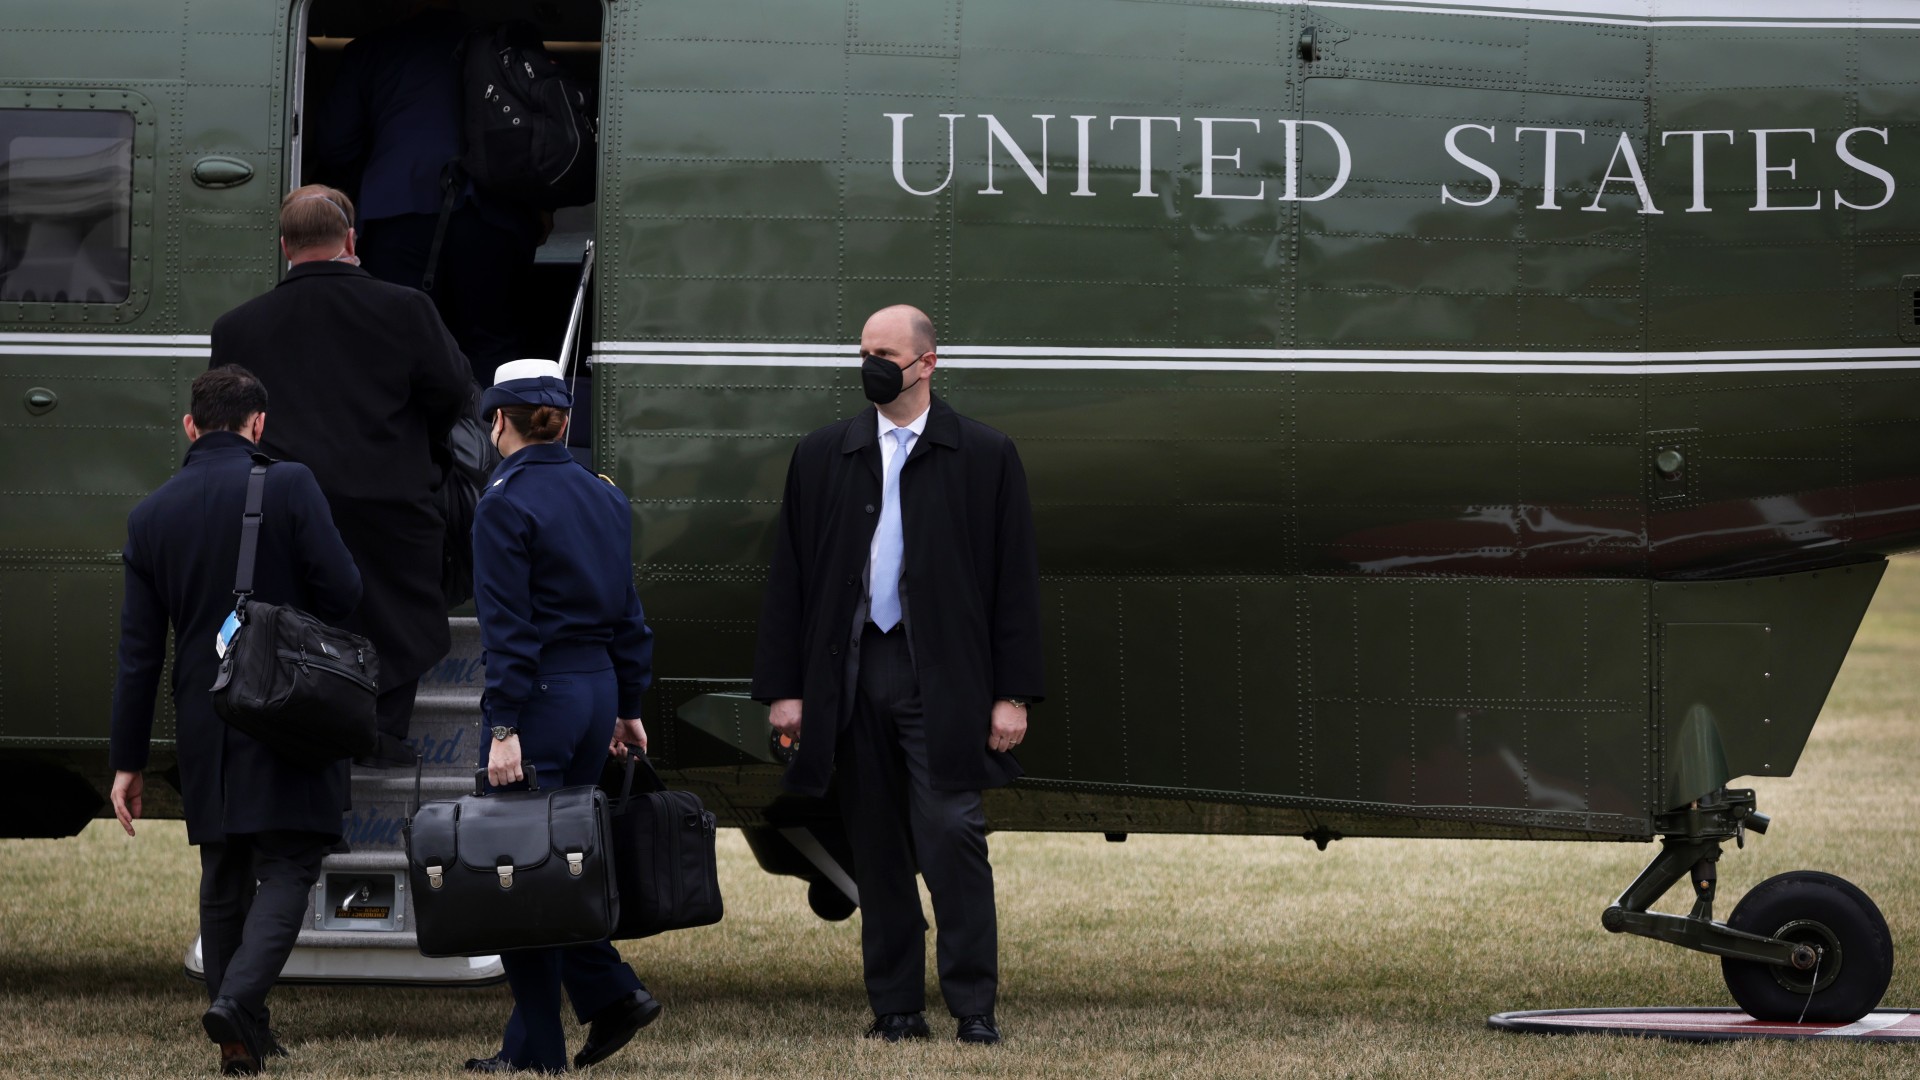 A military aide carries a briefcase, also known as the “nuclear football” with launch codes for nuclear weapons, as she boards Marine One at the White House on February 17, 2022 in Washington, DC. President Biden is traveling to Ohio to highlight a $1 billion investment in environmental cleanup projects in the Great Lakes region.